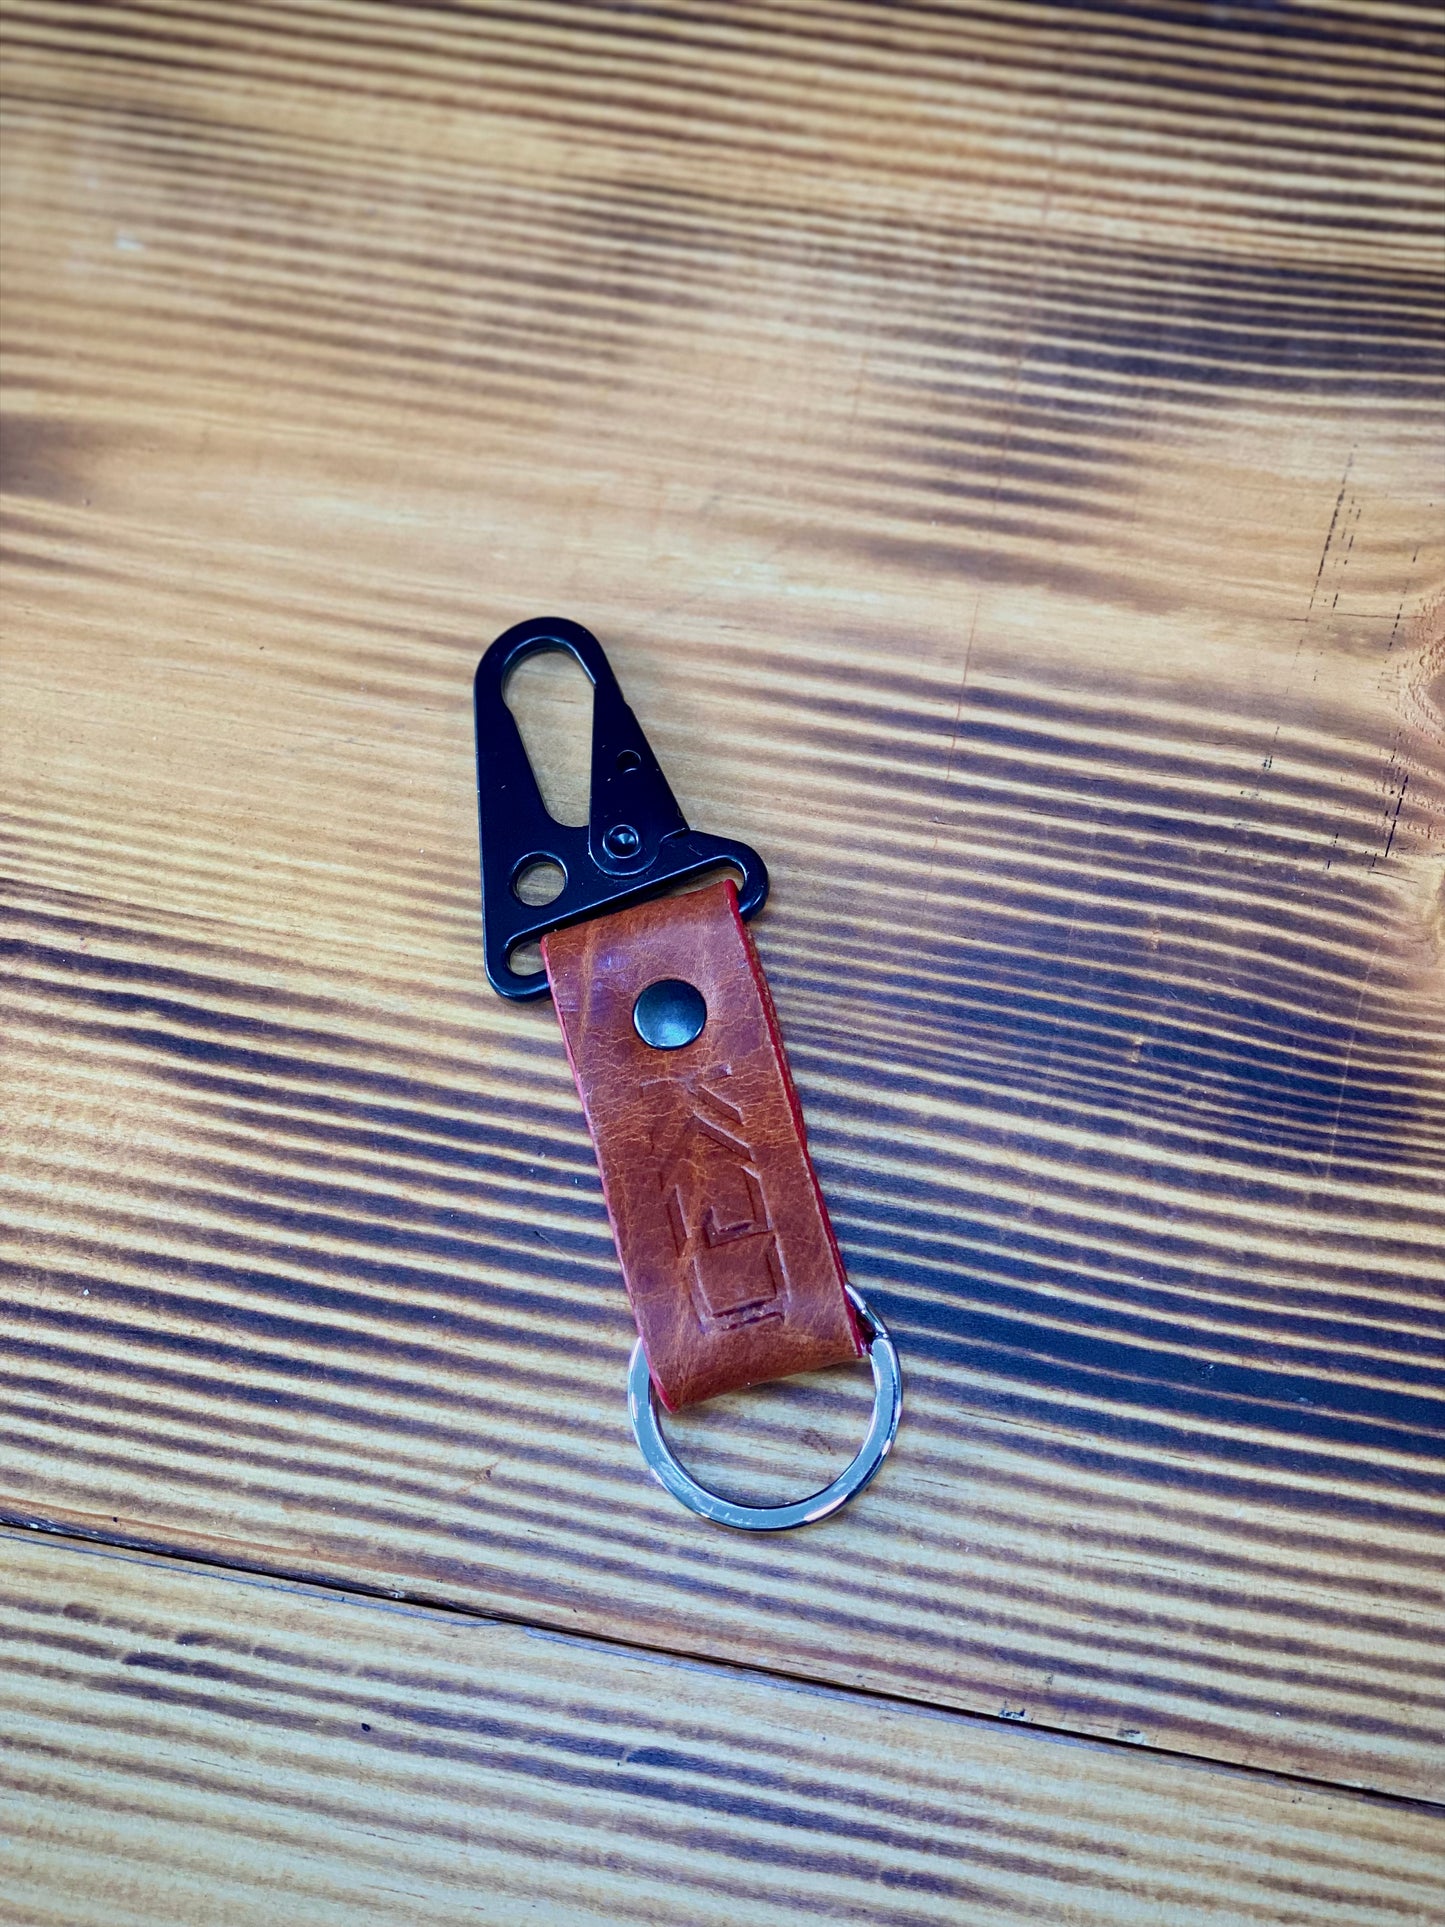 Kaiju Cut and Sew Brown Horween Leather Key Fob, Key Chain